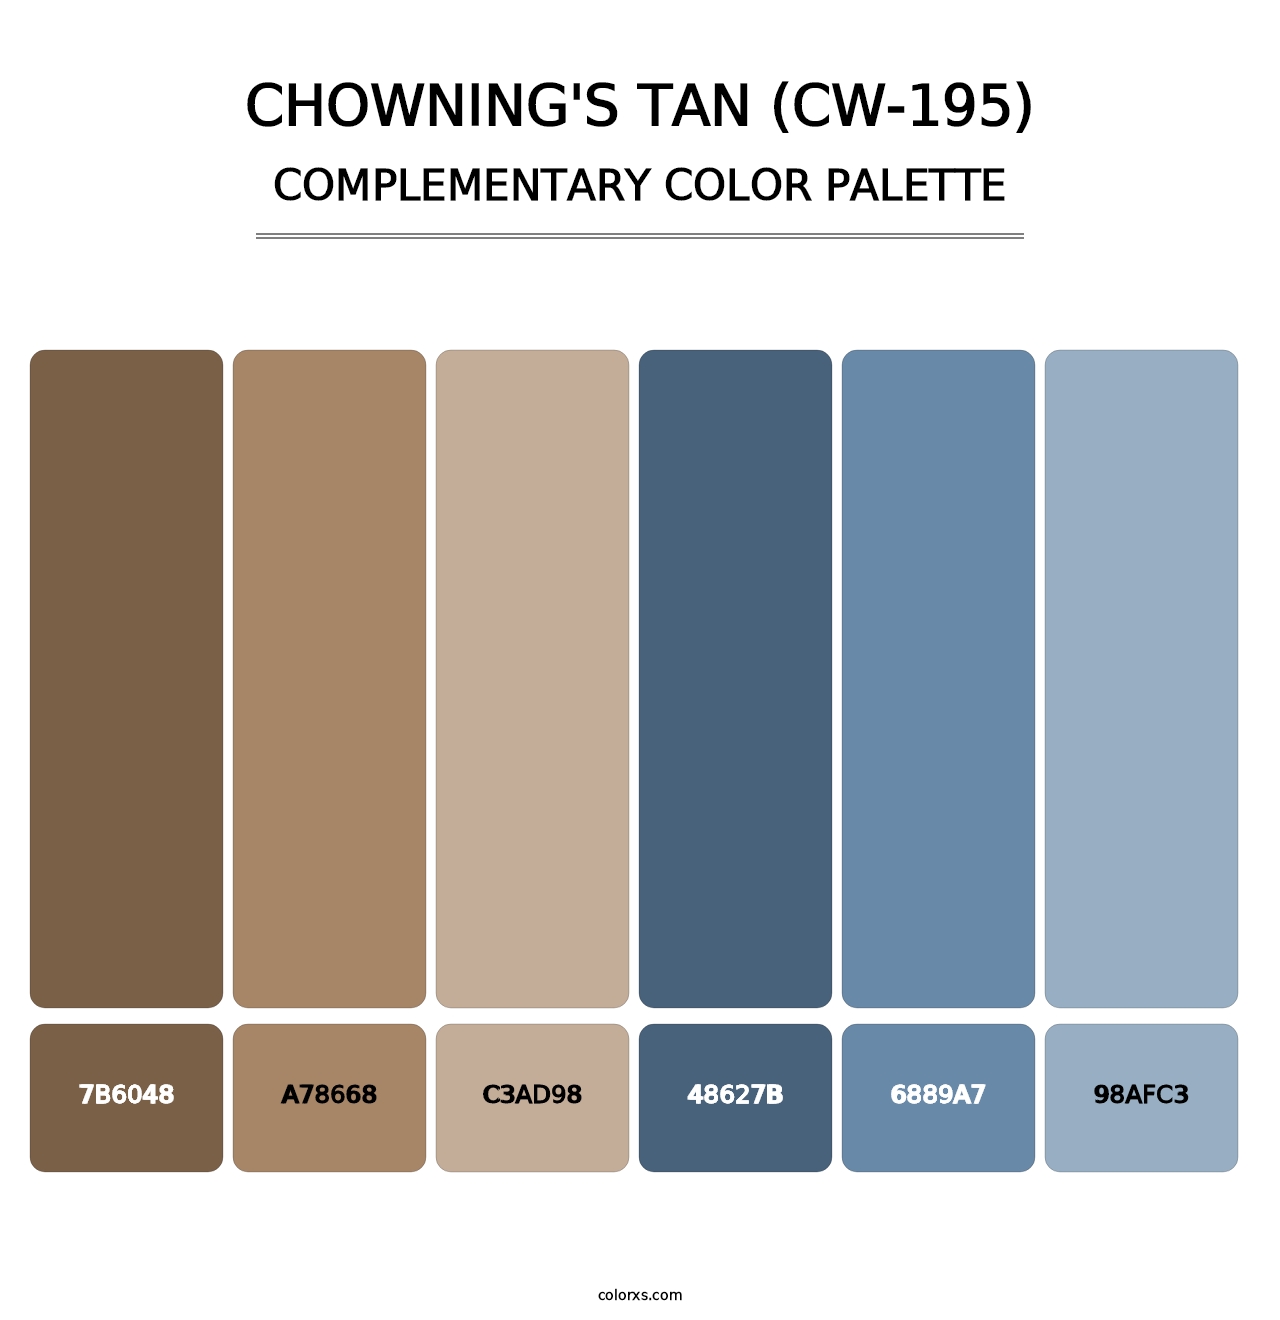 Chowning's Tan (CW-195) - Complementary Color Palette